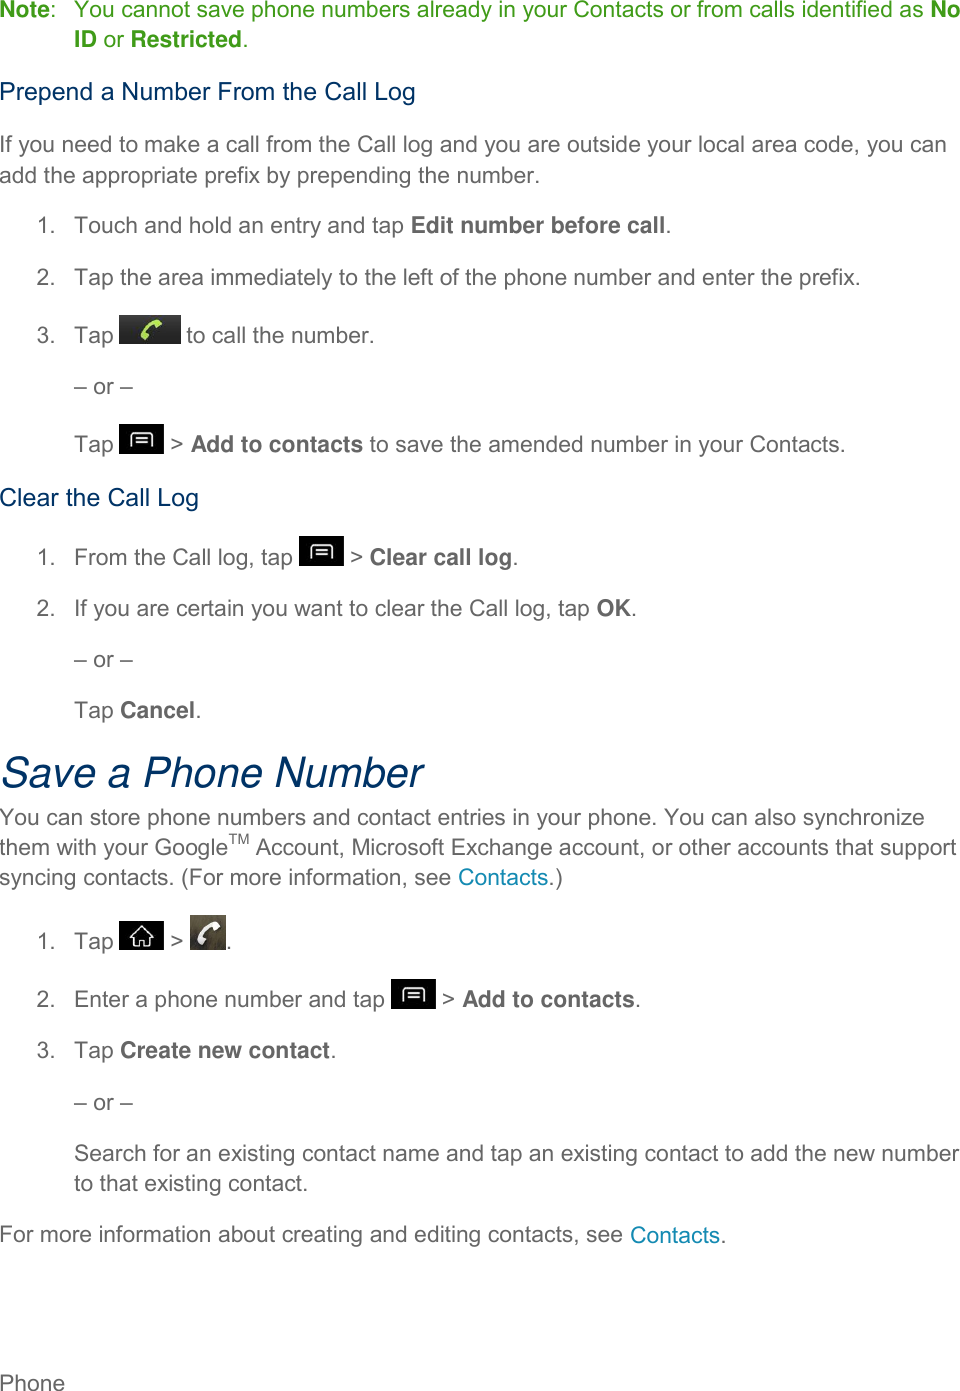 Phone     Note:   You cannot save phone numbers already in your Contacts or from calls identified as No ID or Restricted. Prepend a Number From the Call Log If you need to make a call from the Call log and you are outside your local area code, you can add the appropriate prefix by prepending the number. 1.  Touch and hold an entry and tap Edit number before call. 2.  Tap the area immediately to the left of the phone number and enter the prefix. 3.  Tap   to call the number. – or – Tap   &gt; Add to contacts to save the amended number in your Contacts. Clear the Call Log 1.  From the Call log, tap   &gt; Clear call log. 2.  If you are certain you want to clear the Call log, tap OK. – or – Tap Cancel. Save a Phone Number You can store phone numbers and contact entries in your phone. You can also synchronize them with your GoogleTM Account, Microsoft Exchange account, or other accounts that support syncing contacts. (For more information, see Contacts.) 1.  Tap   &gt;  . 2.  Enter a phone number and tap   &gt; Add to contacts. 3.  Tap Create new contact. – or – Search for an existing contact name and tap an existing contact to add the new number to that existing contact. For more information about creating and editing contacts, see Contacts. 